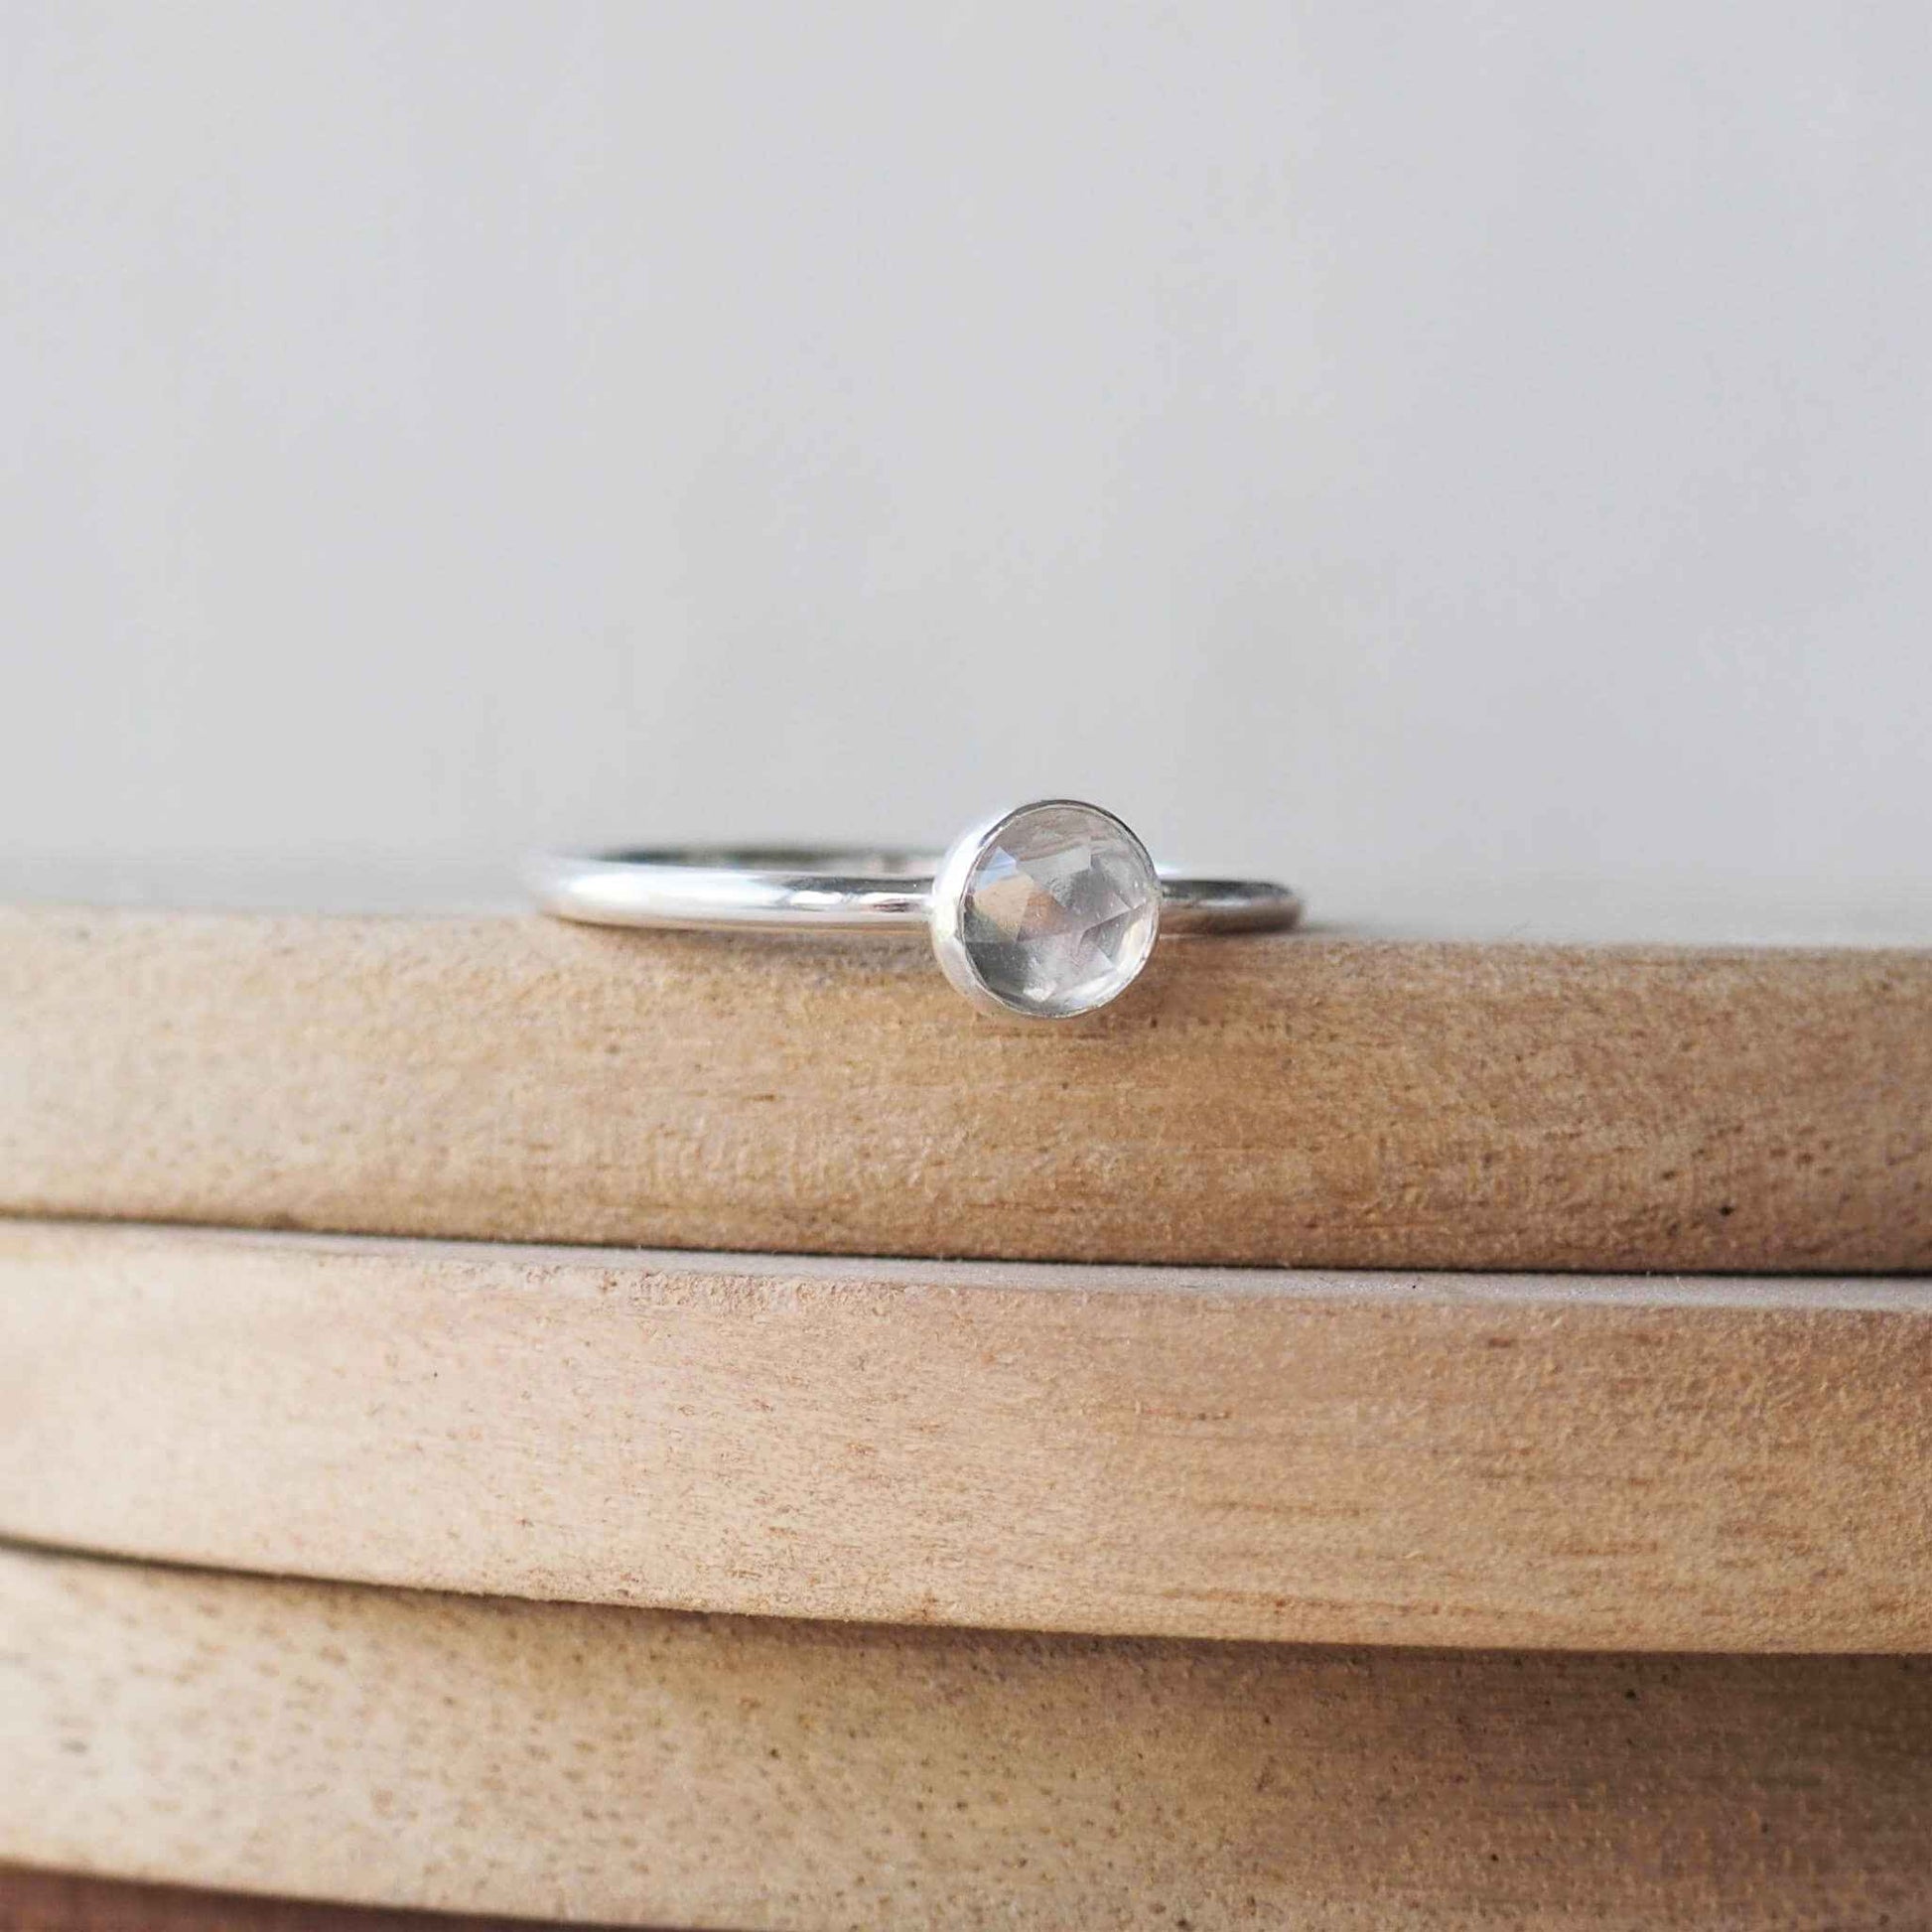 White Topaz and Sterling Silver simple minimalist ring with a 5mm round clear facet cut White Topaz, Birthstone for April. Handmade in Scotland by maram jewellery